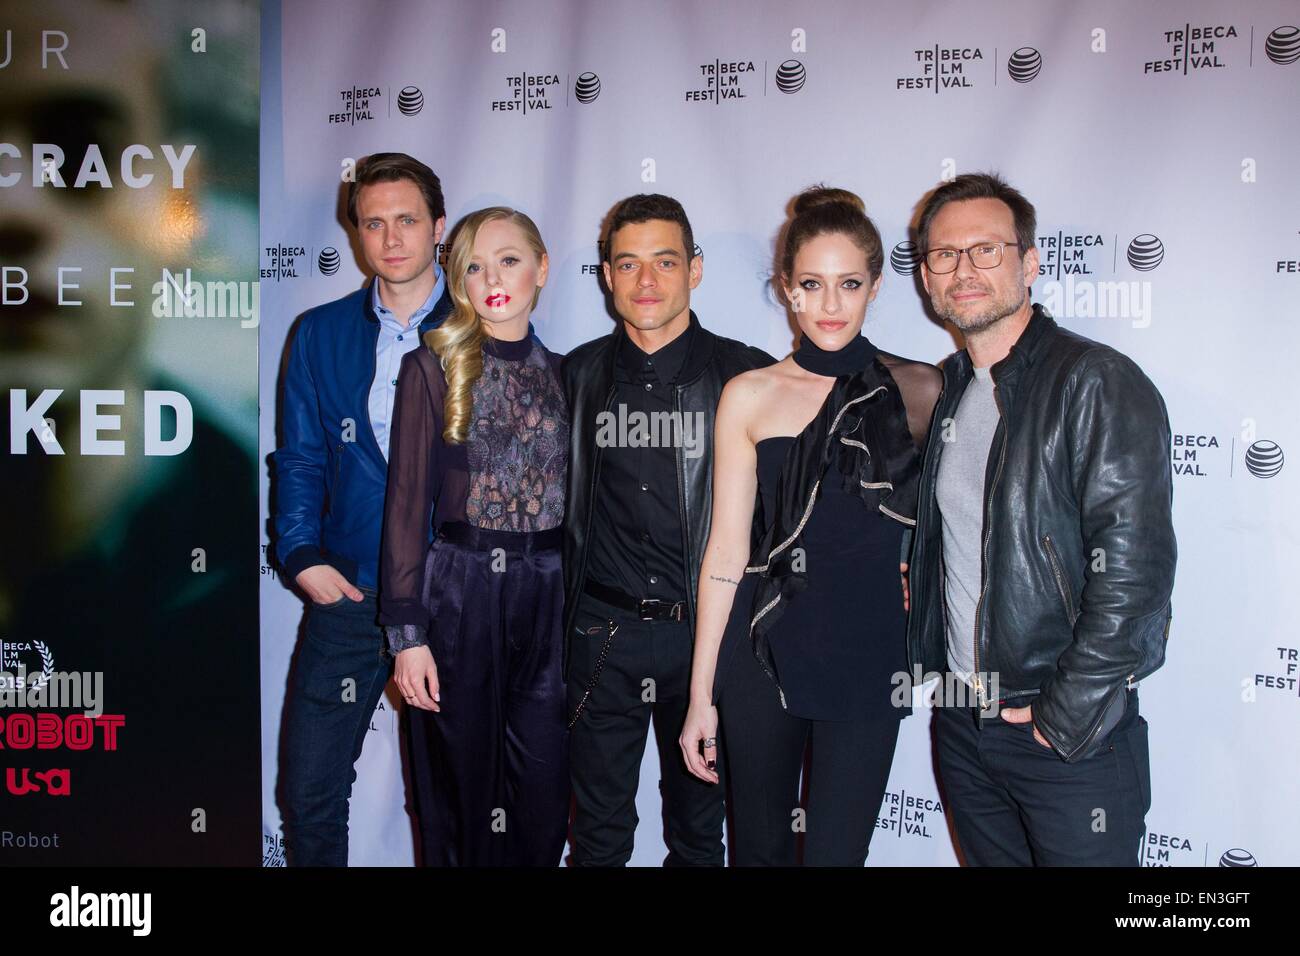 New York, NY, USA. 26th Apr, 2015. Martin Wallstrom, Portia Doubleday, Rami Malek, Carly Chaikin, and Christian Slater at arrivals for MR.ROBOT Series Premiere on USA Network, Bow Tie Cinemas Chelsea, New York, NY April 26, 2015. Credit:  Abel Fermin/Everett Collection/Alamy Live News Stock Photo